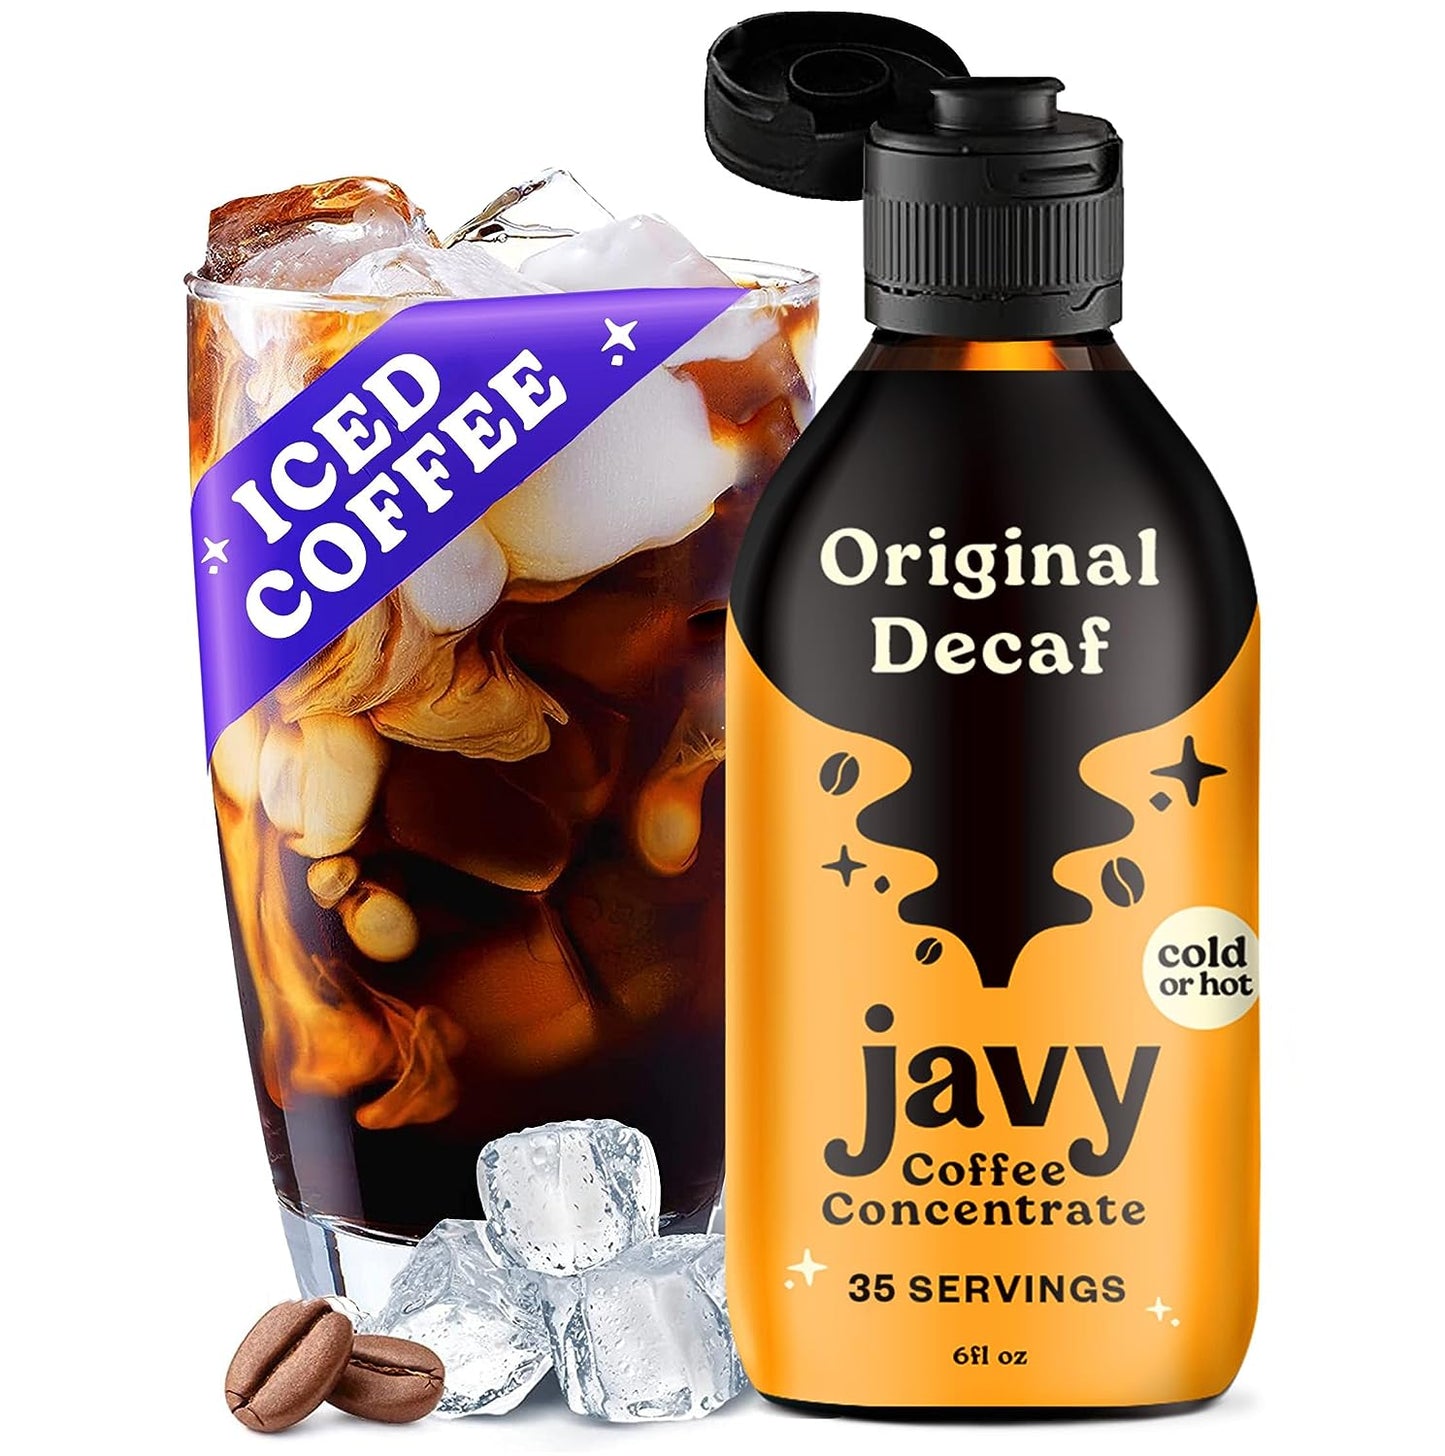 Decaf - Coffee Concentrate